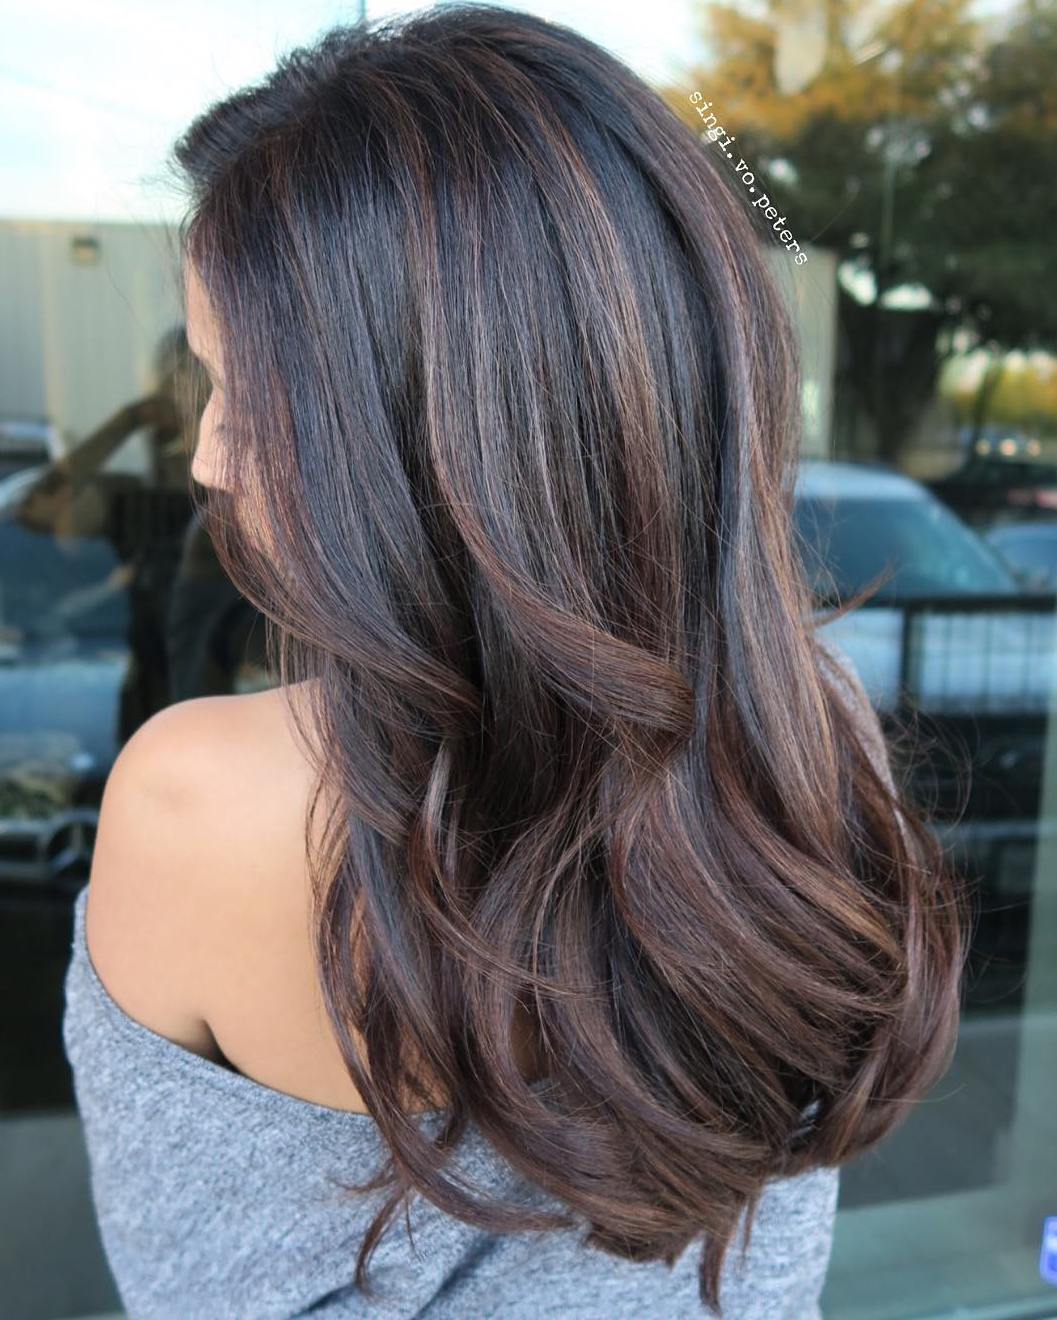 dark hair color ideas with colorful highlights